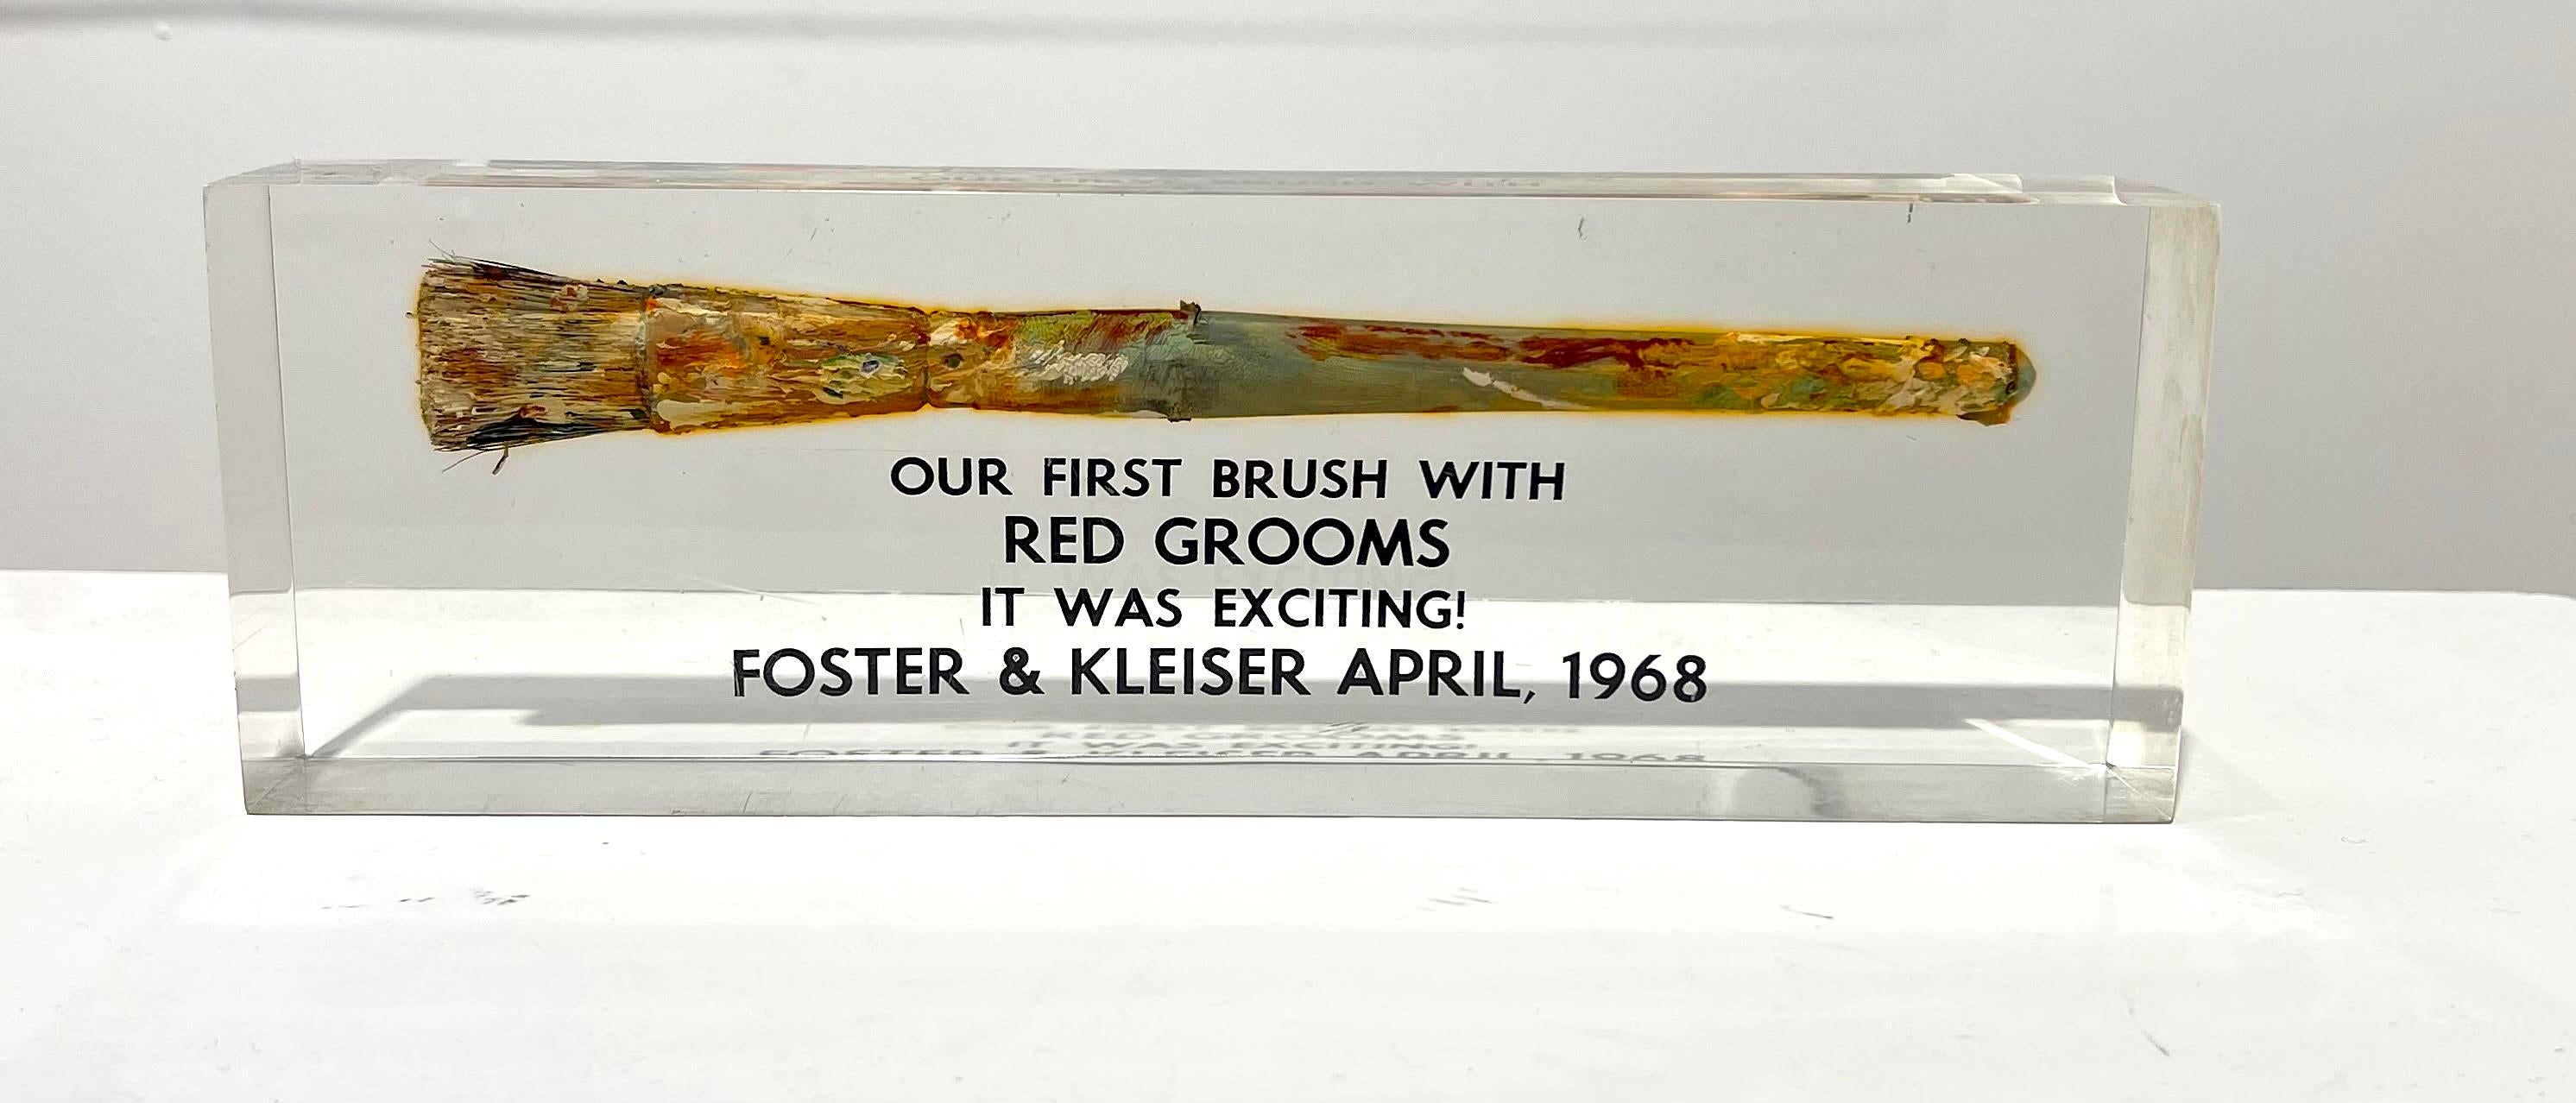 Red Grooms
"Our First Brush With Red Grooms/ It Was Exciting!", 1968
Paint brush with paint inside acrylic casing
11 × 3 1/2 × 2 inches
Unframed
This paint brush - with original paint - was Red Groom's first paint brush used to create the billboard,